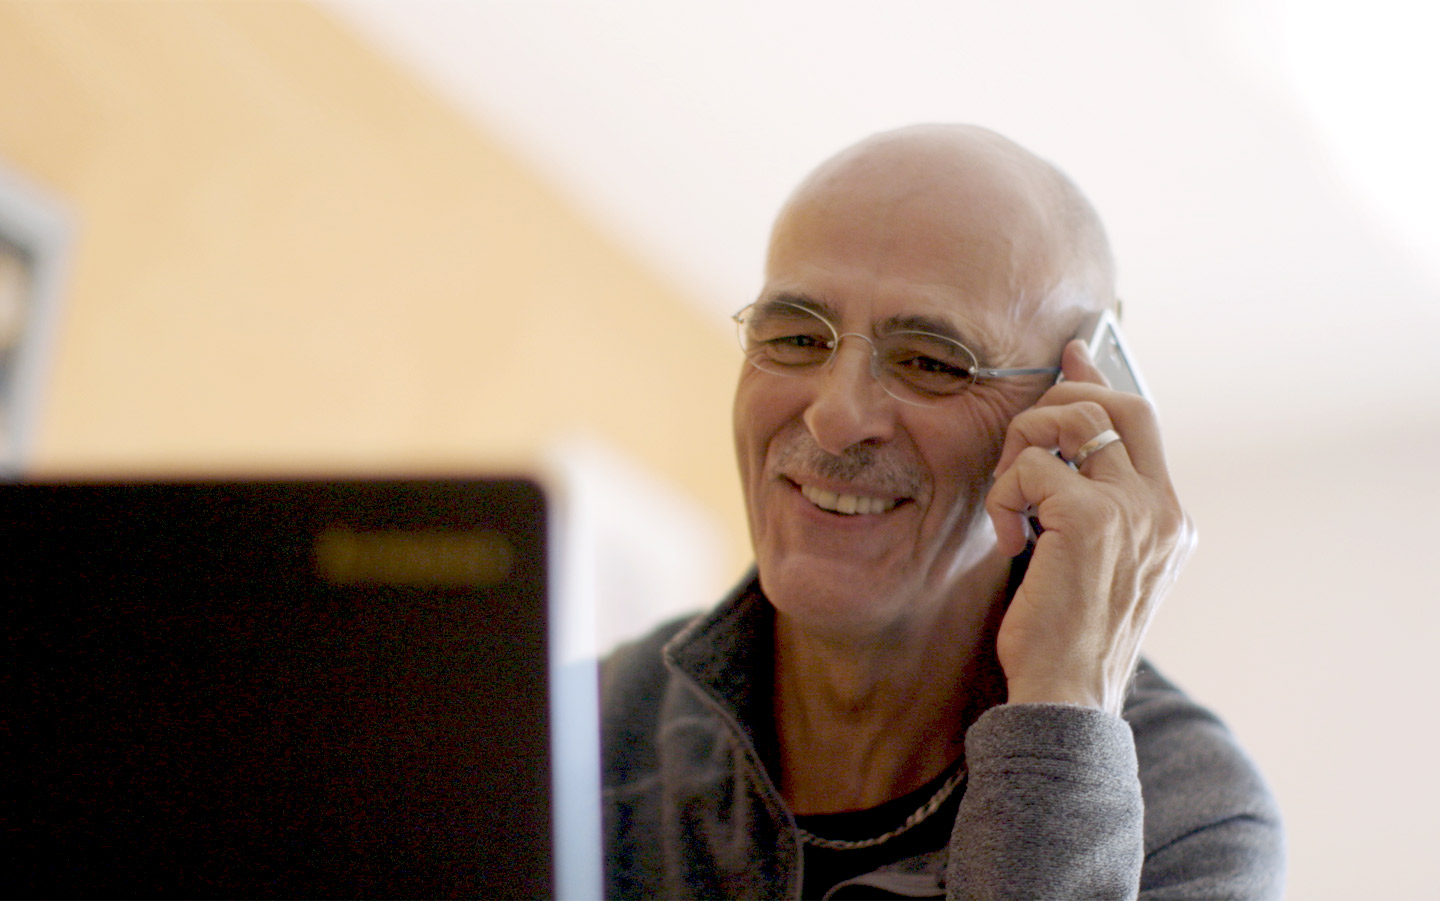 A Cochlear implant recipient talks on the phone